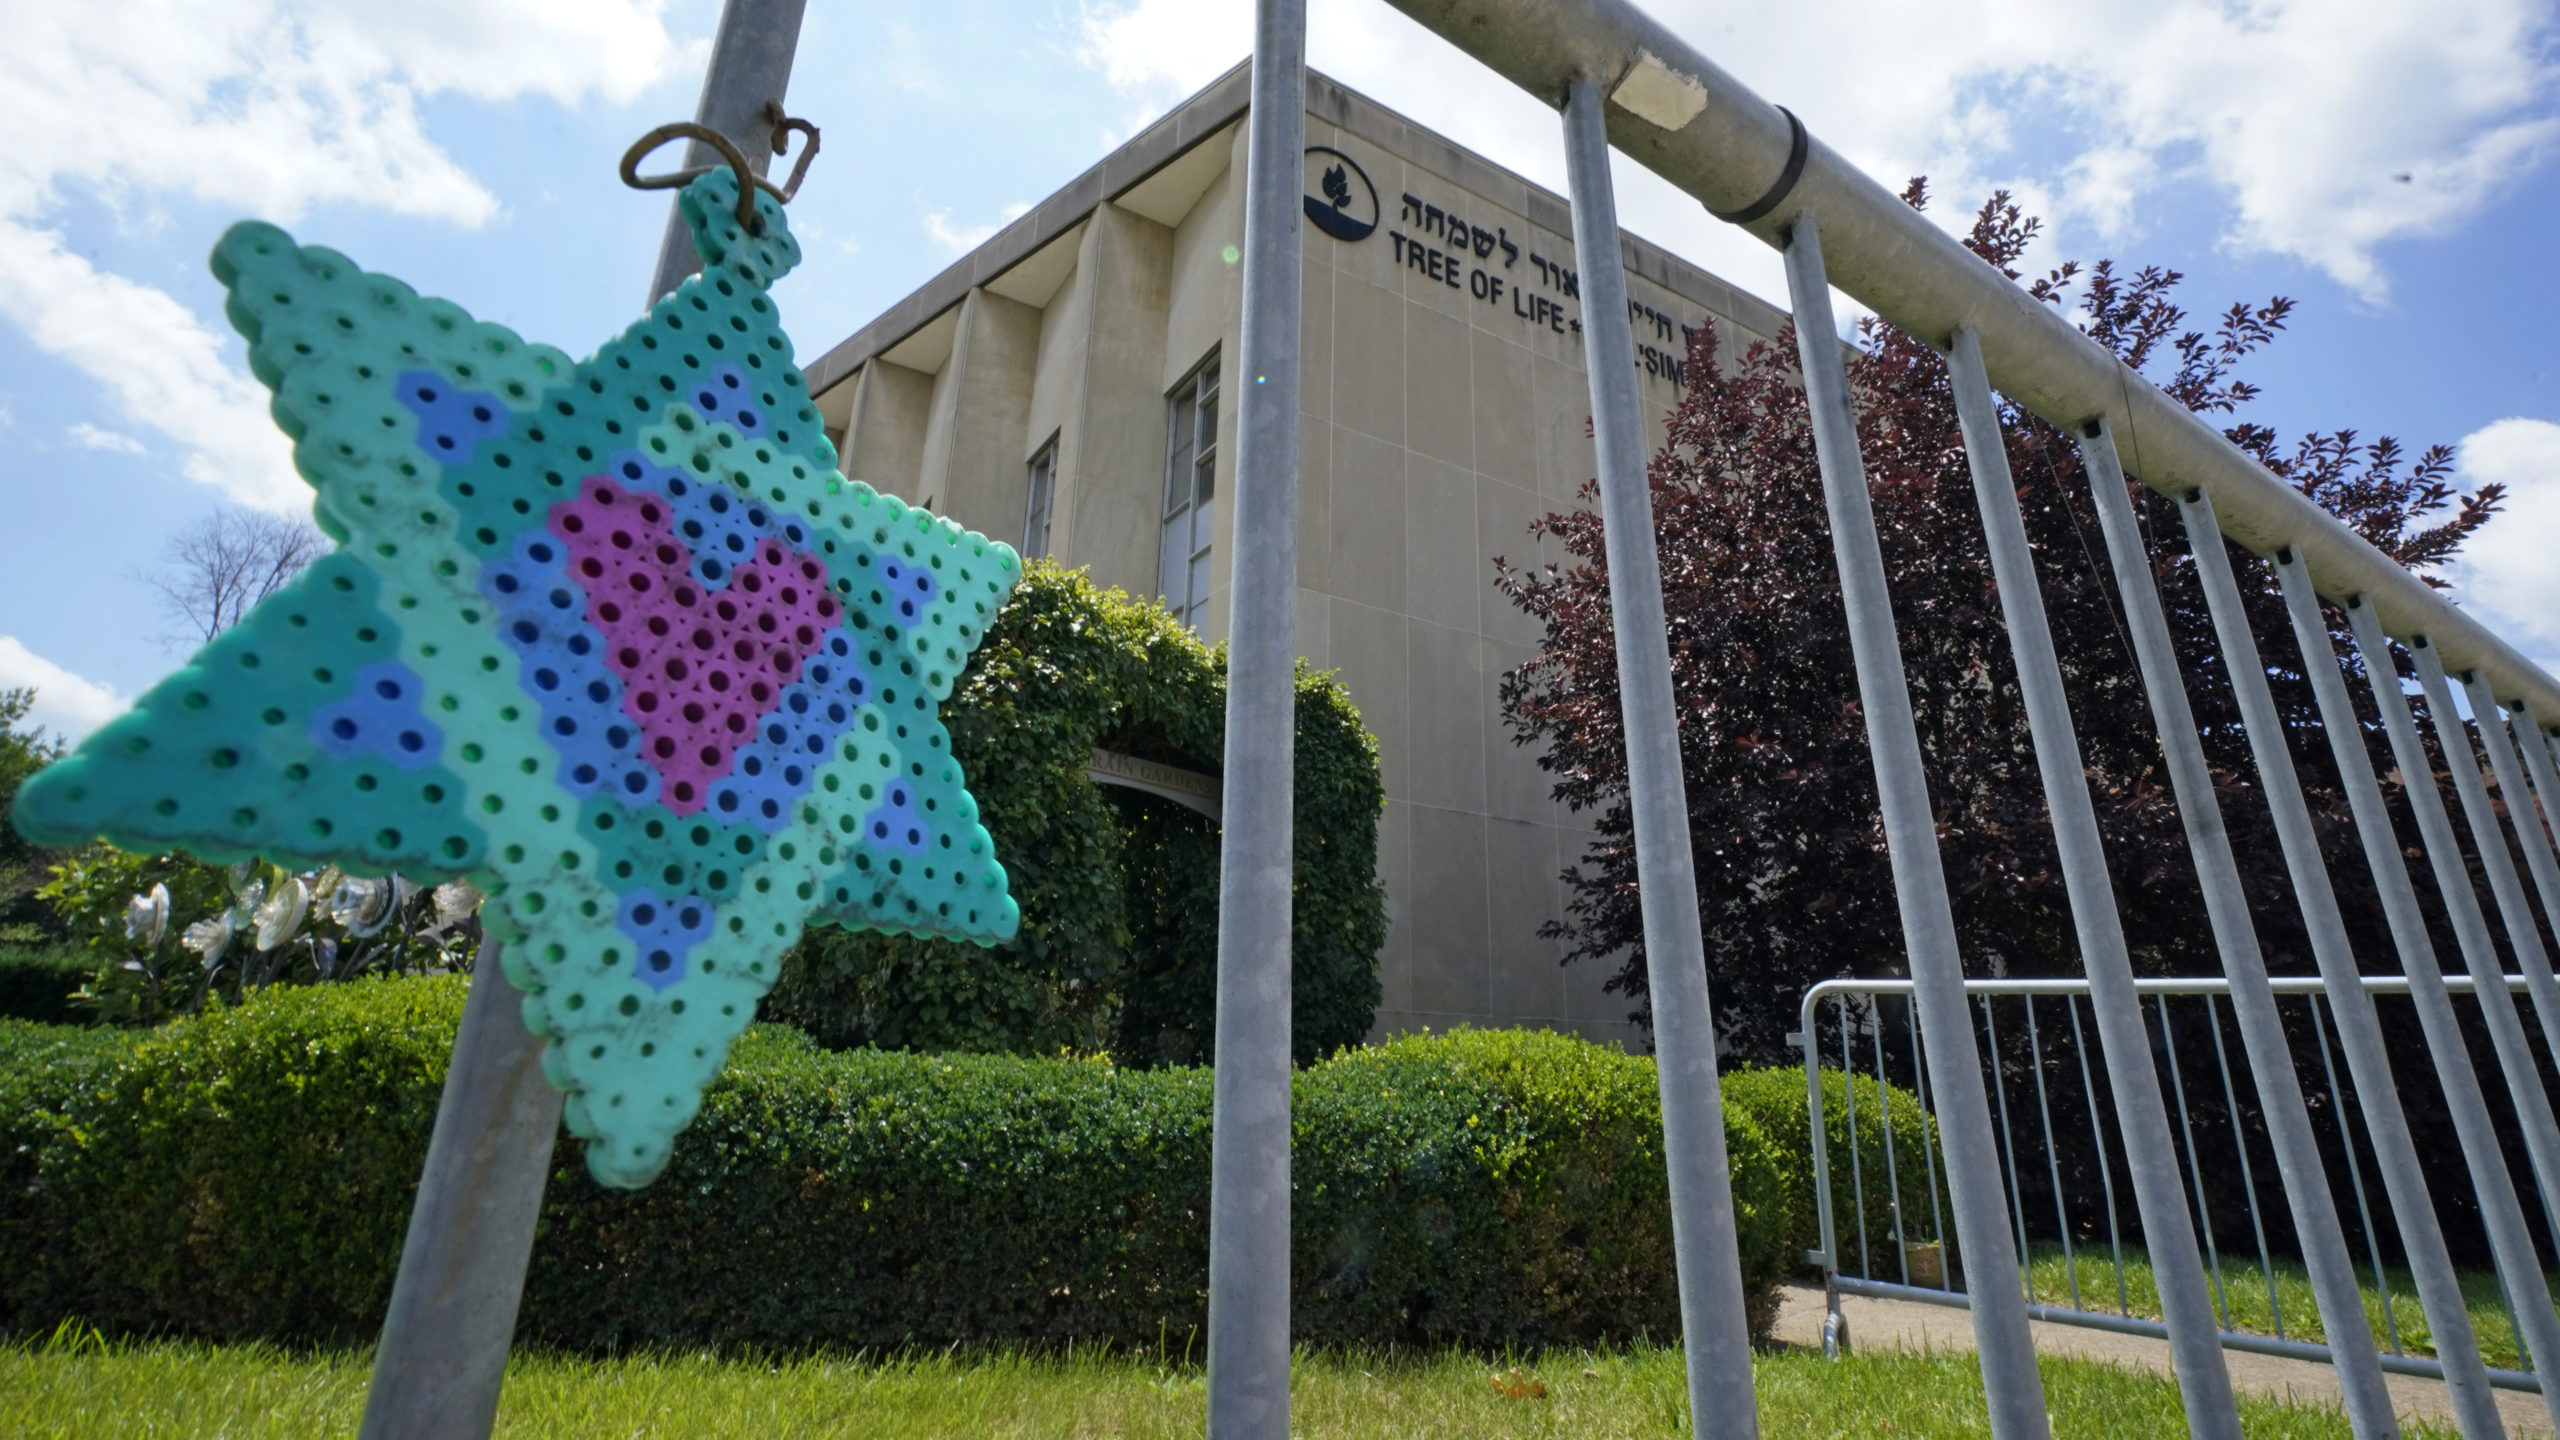 A Star of David hangs from a fence outside the dormant landmark Tree of Life synagogue in Pittsburgh's Squirrel Hill neighborhood on July 13, the day a federal jury announced they had found Robert Bowers, who in 2018 killed 11 people at the synagogue, eligible for the death penalty.